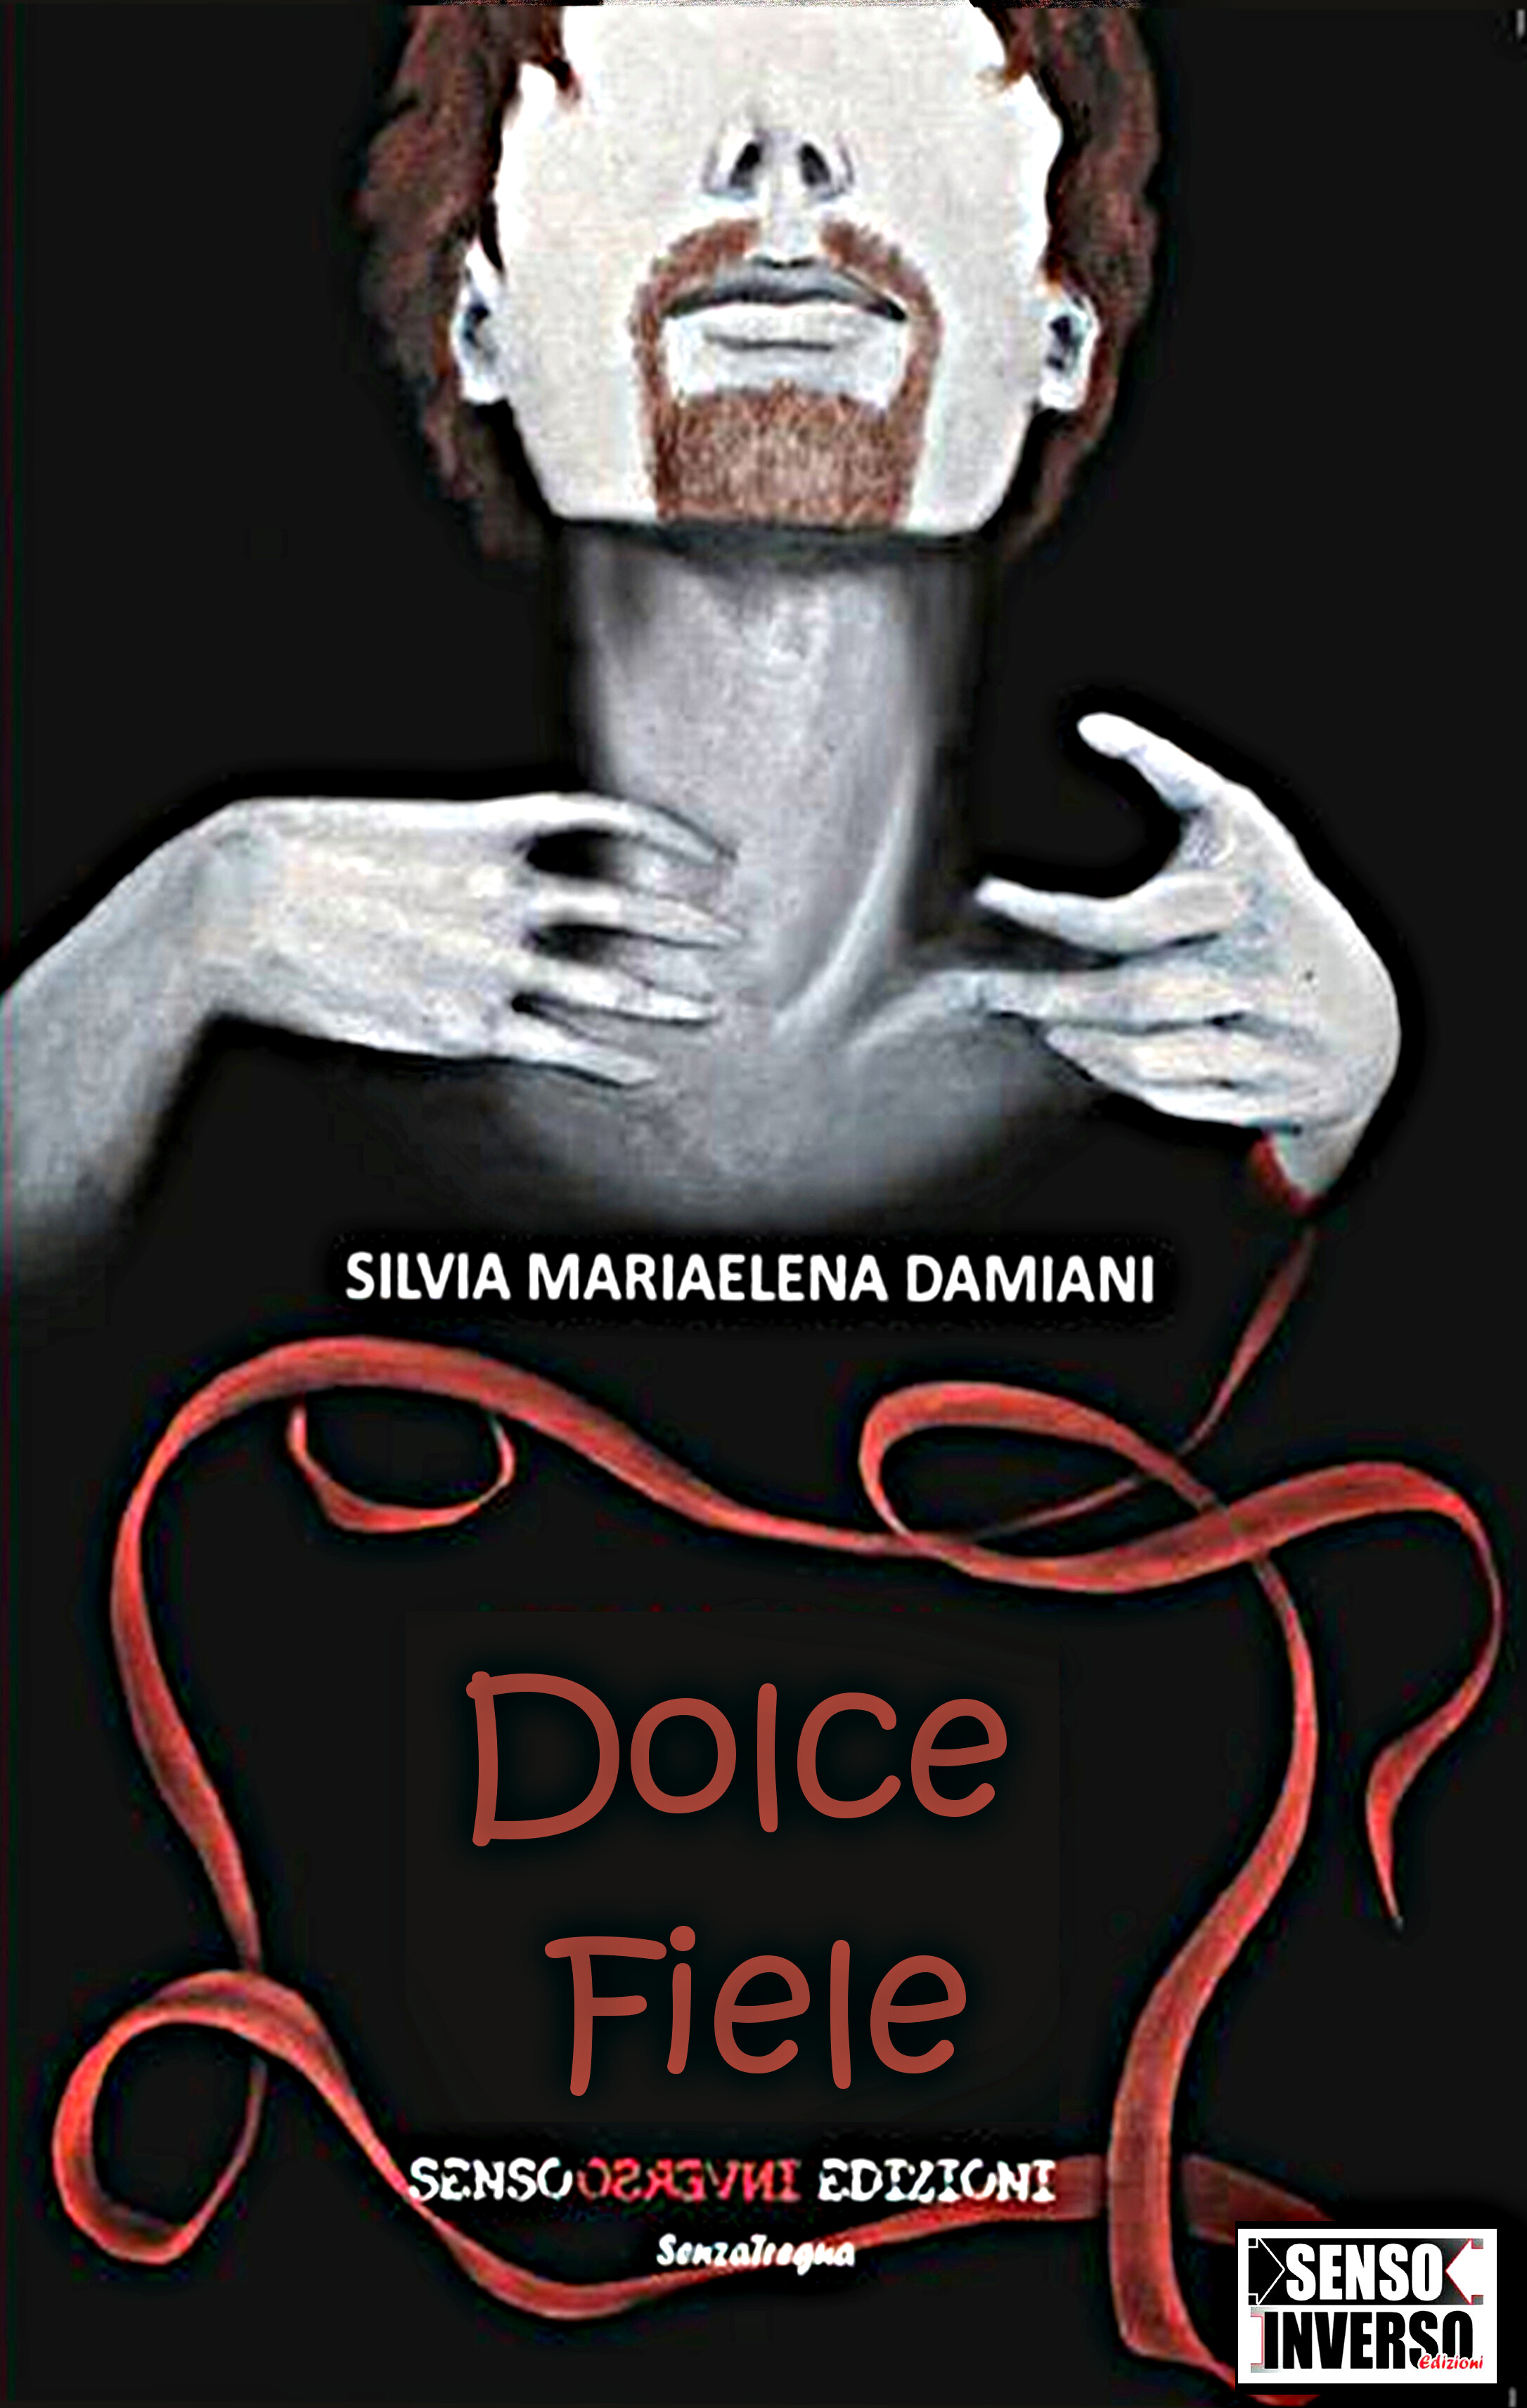 More about Dolce fiele